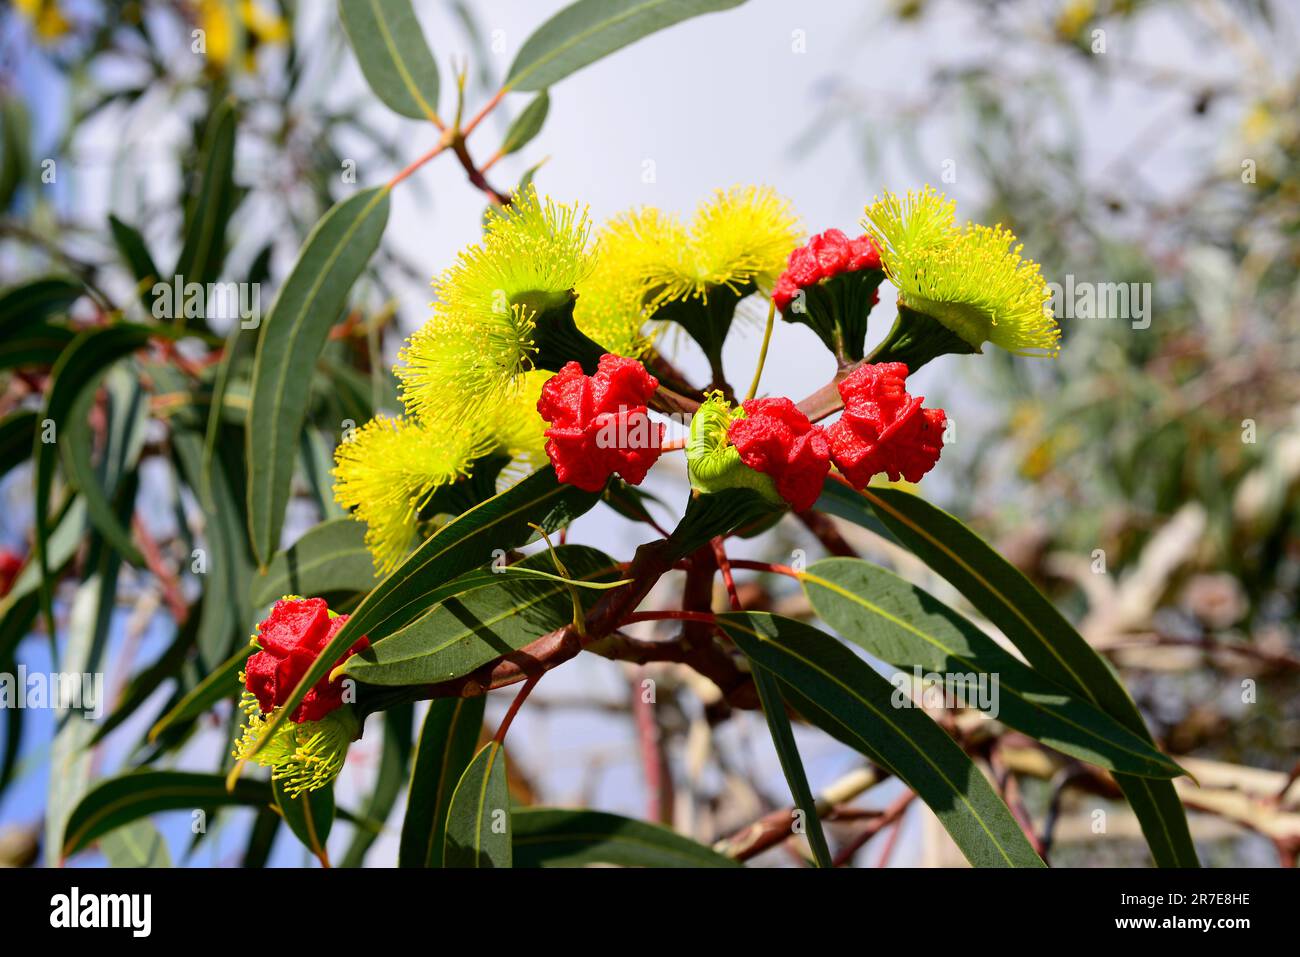 Illyarrye (Eucalyptus erythrocorys) is characterized for yours spectaculars yellow flowers covereds by a brigth-red operculum. Western Australia. Stock Photo